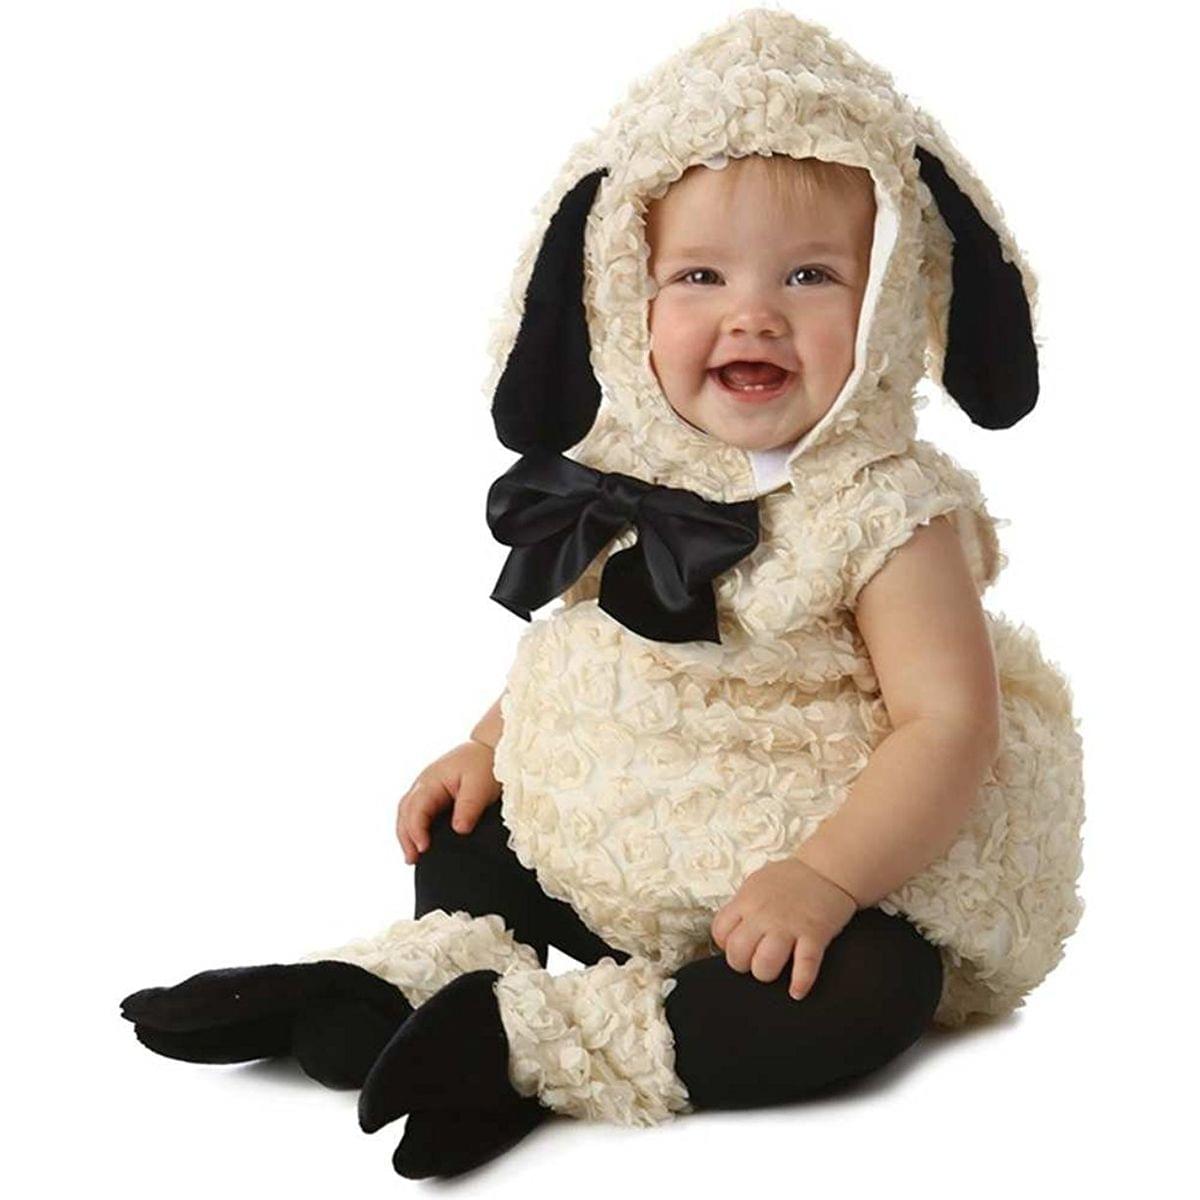 Vintage Lamb Toddler Deluxe Costume